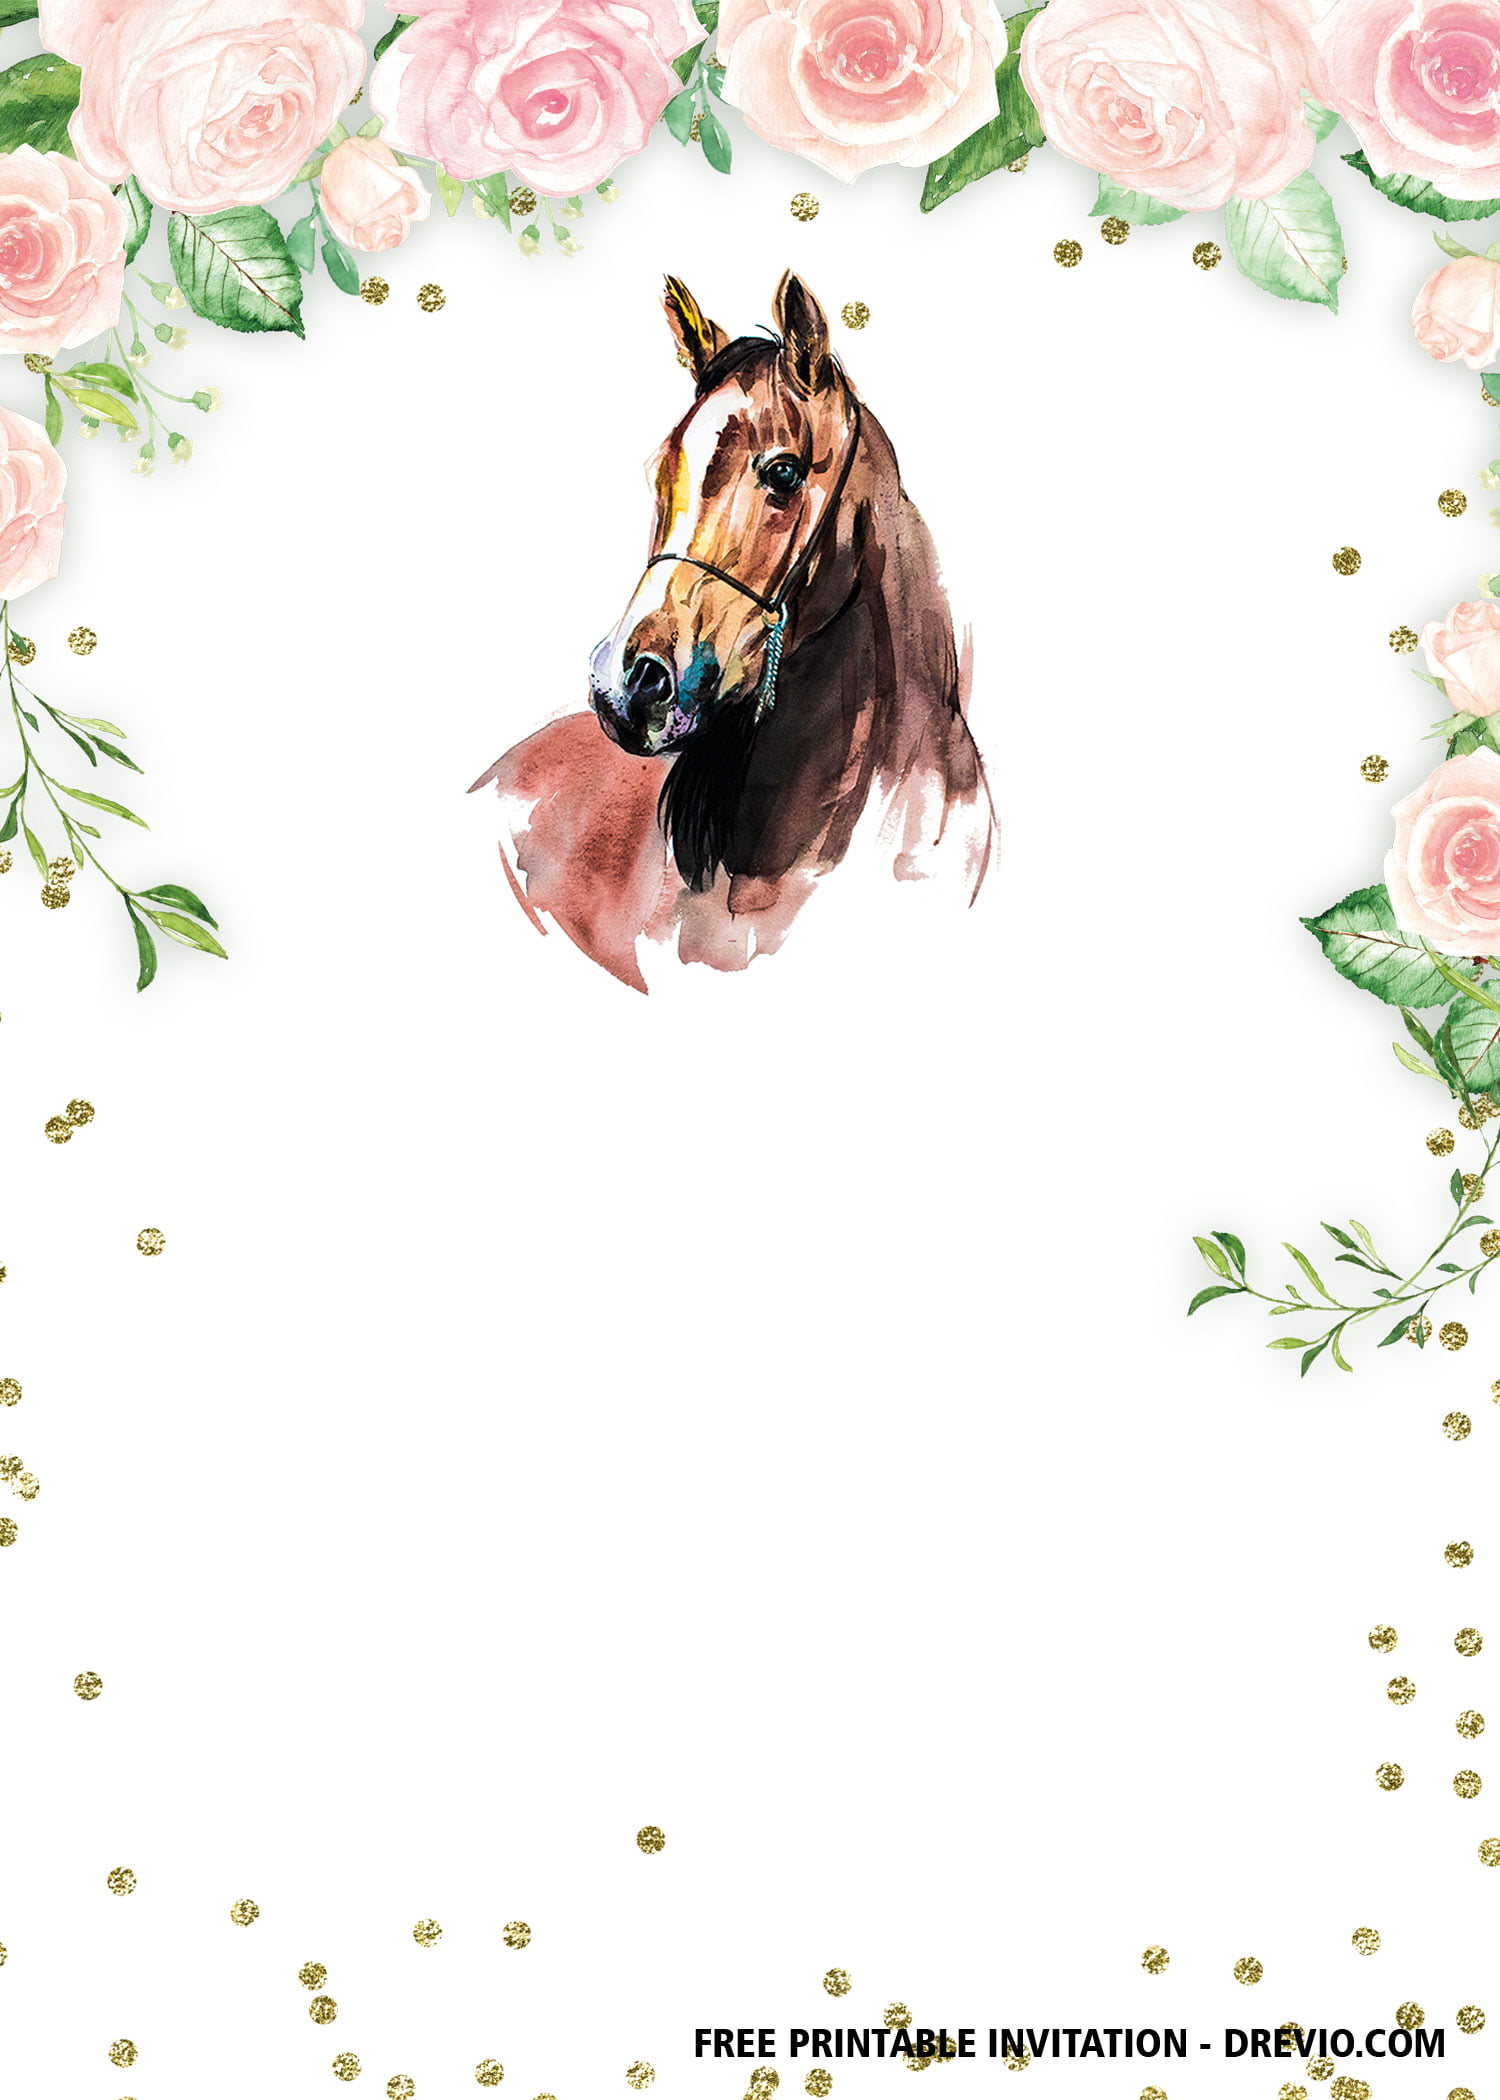 Free Horse Party Printables